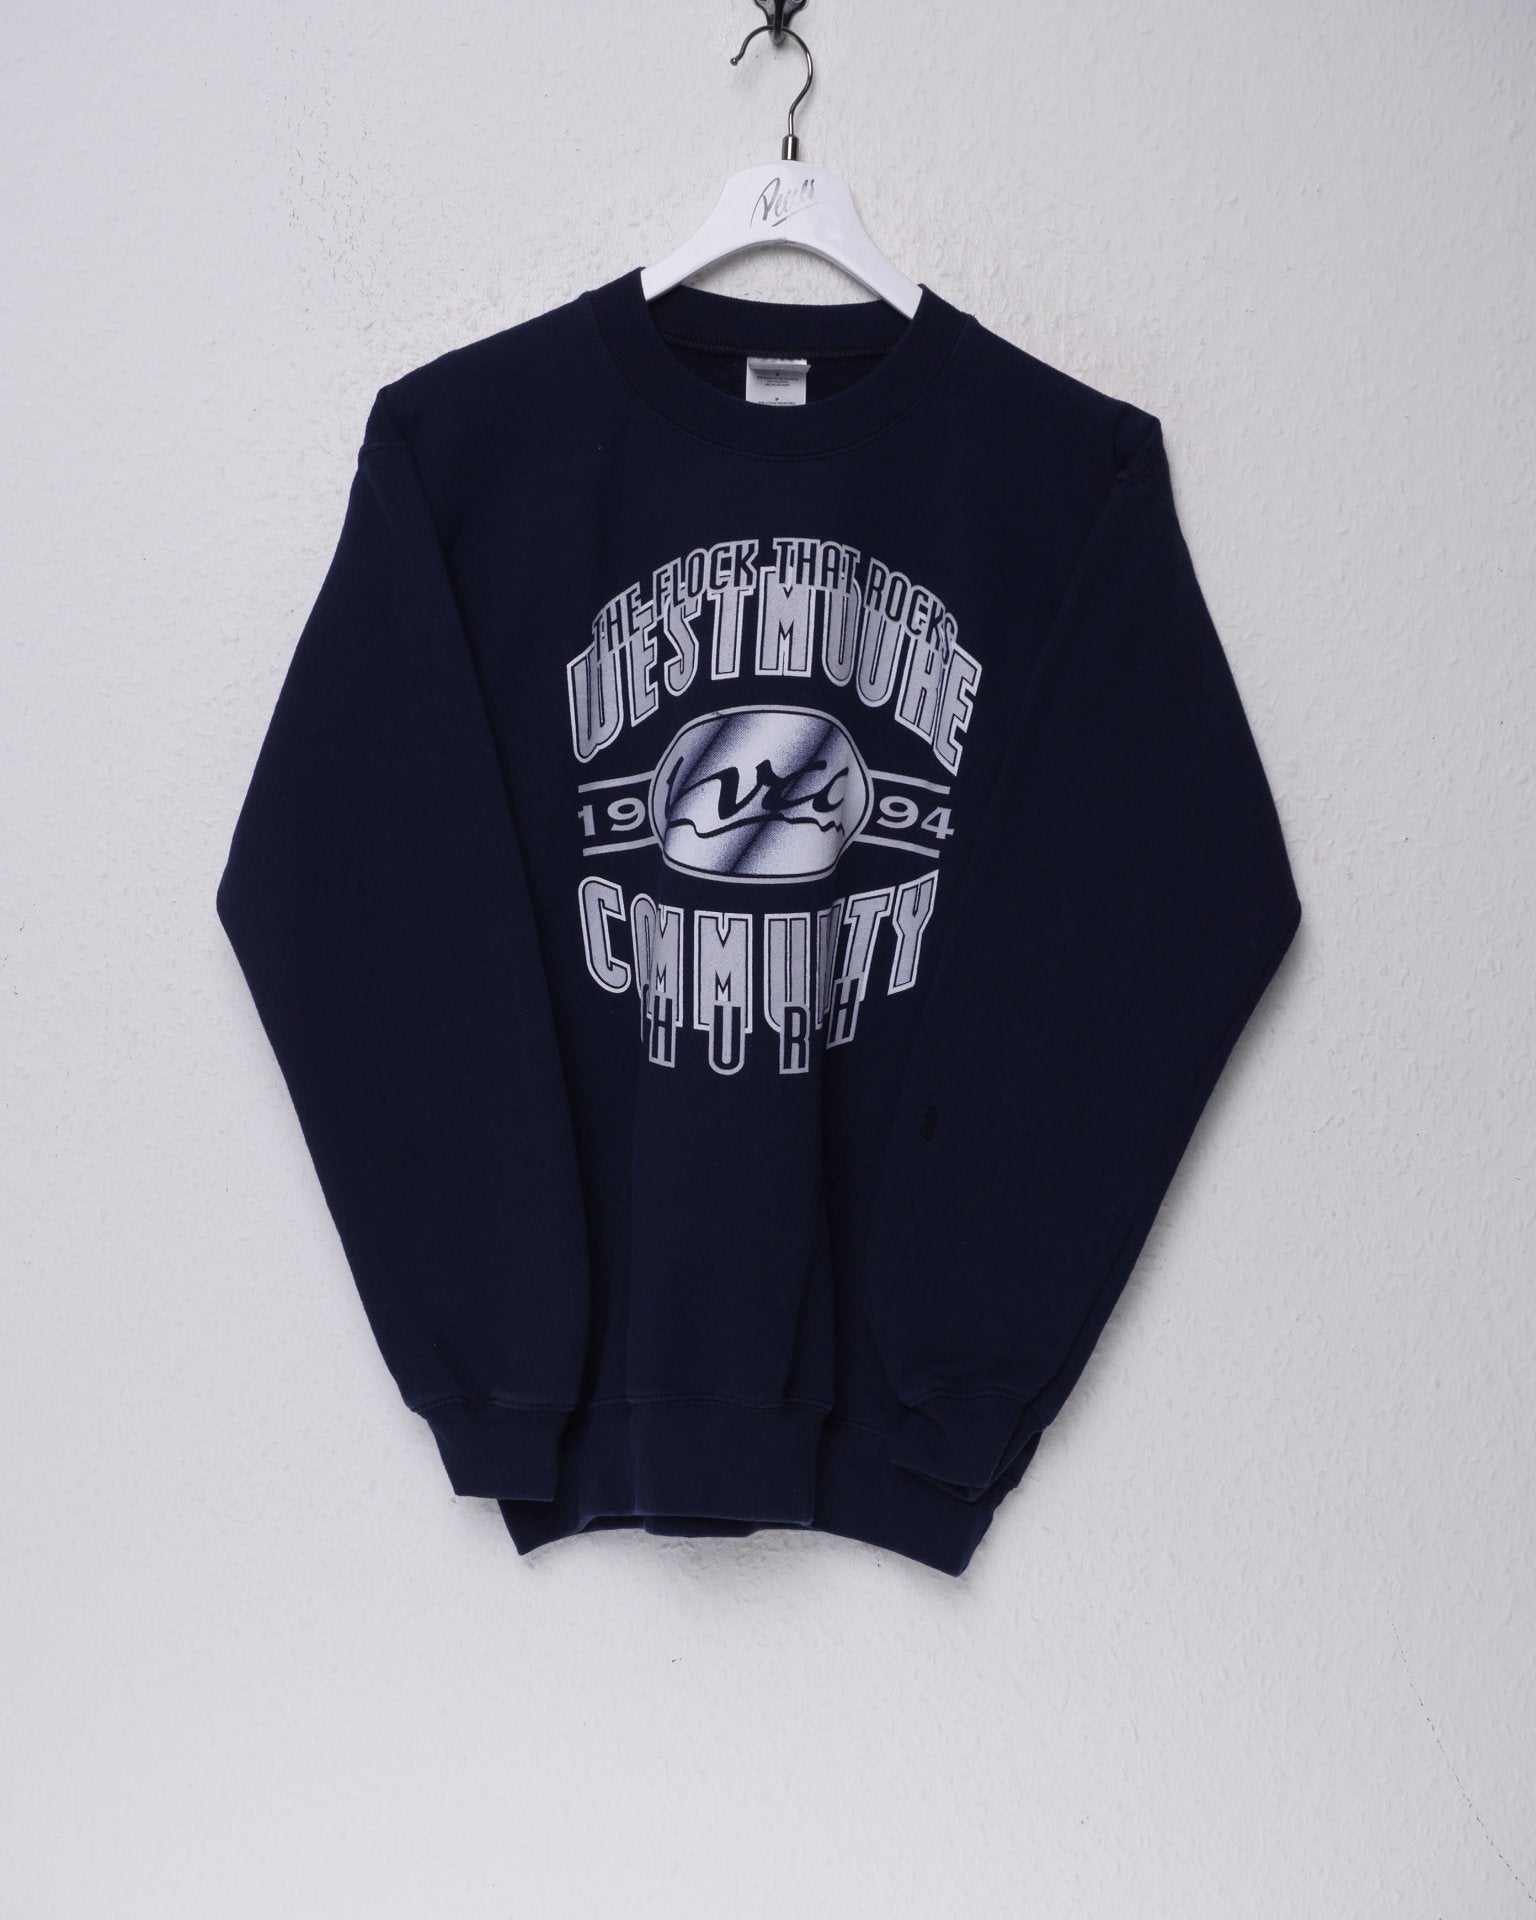 Westmore Community Church printed Logo Sweater - Peeces